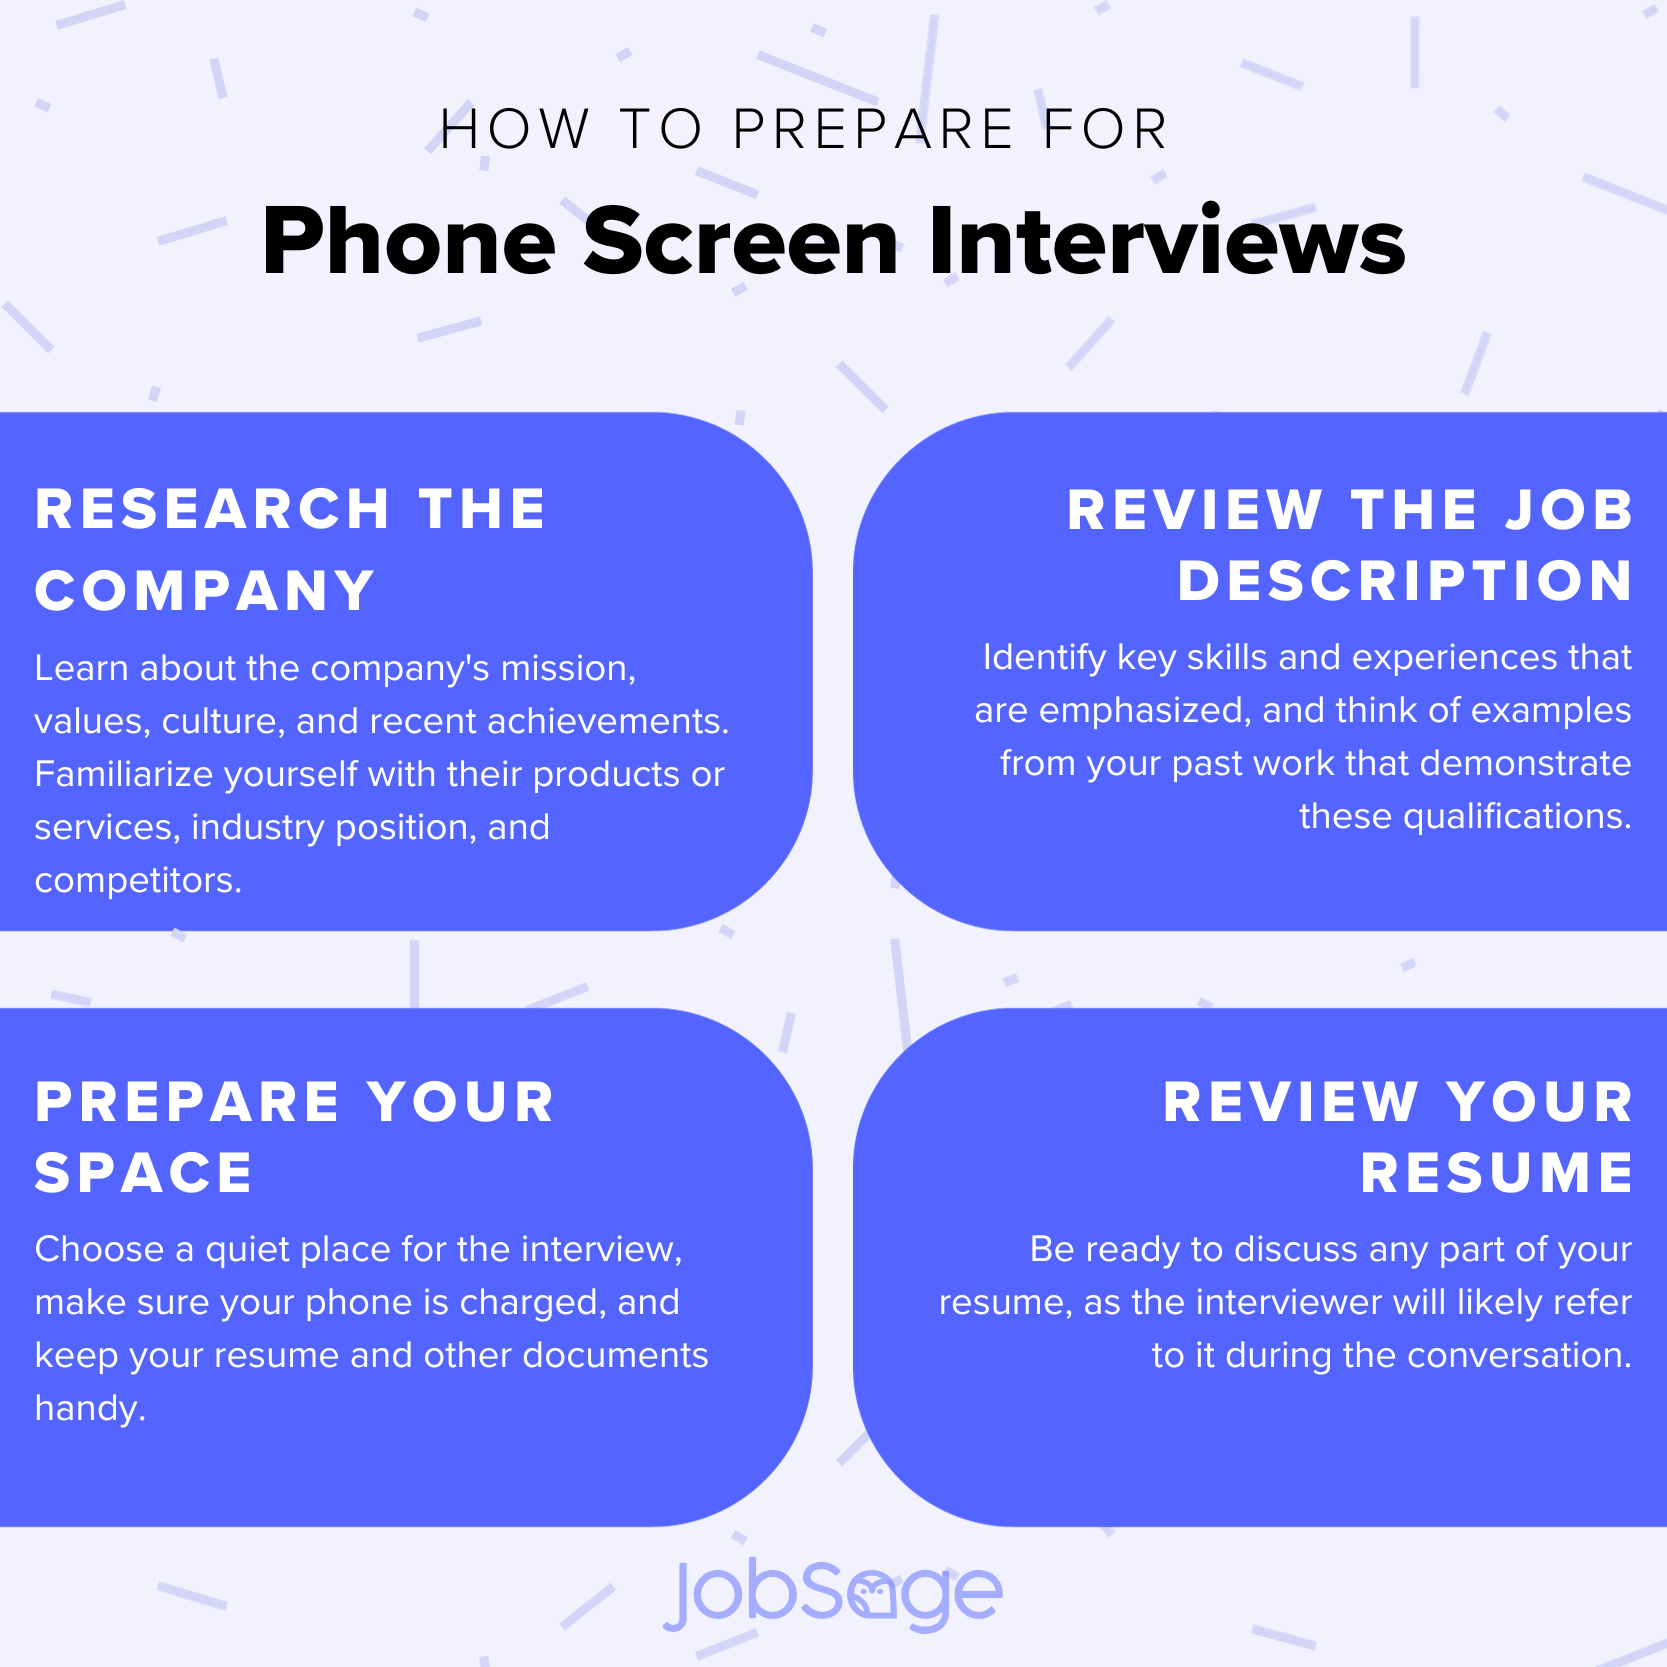 How to Prepare for a Phone Screen Interview